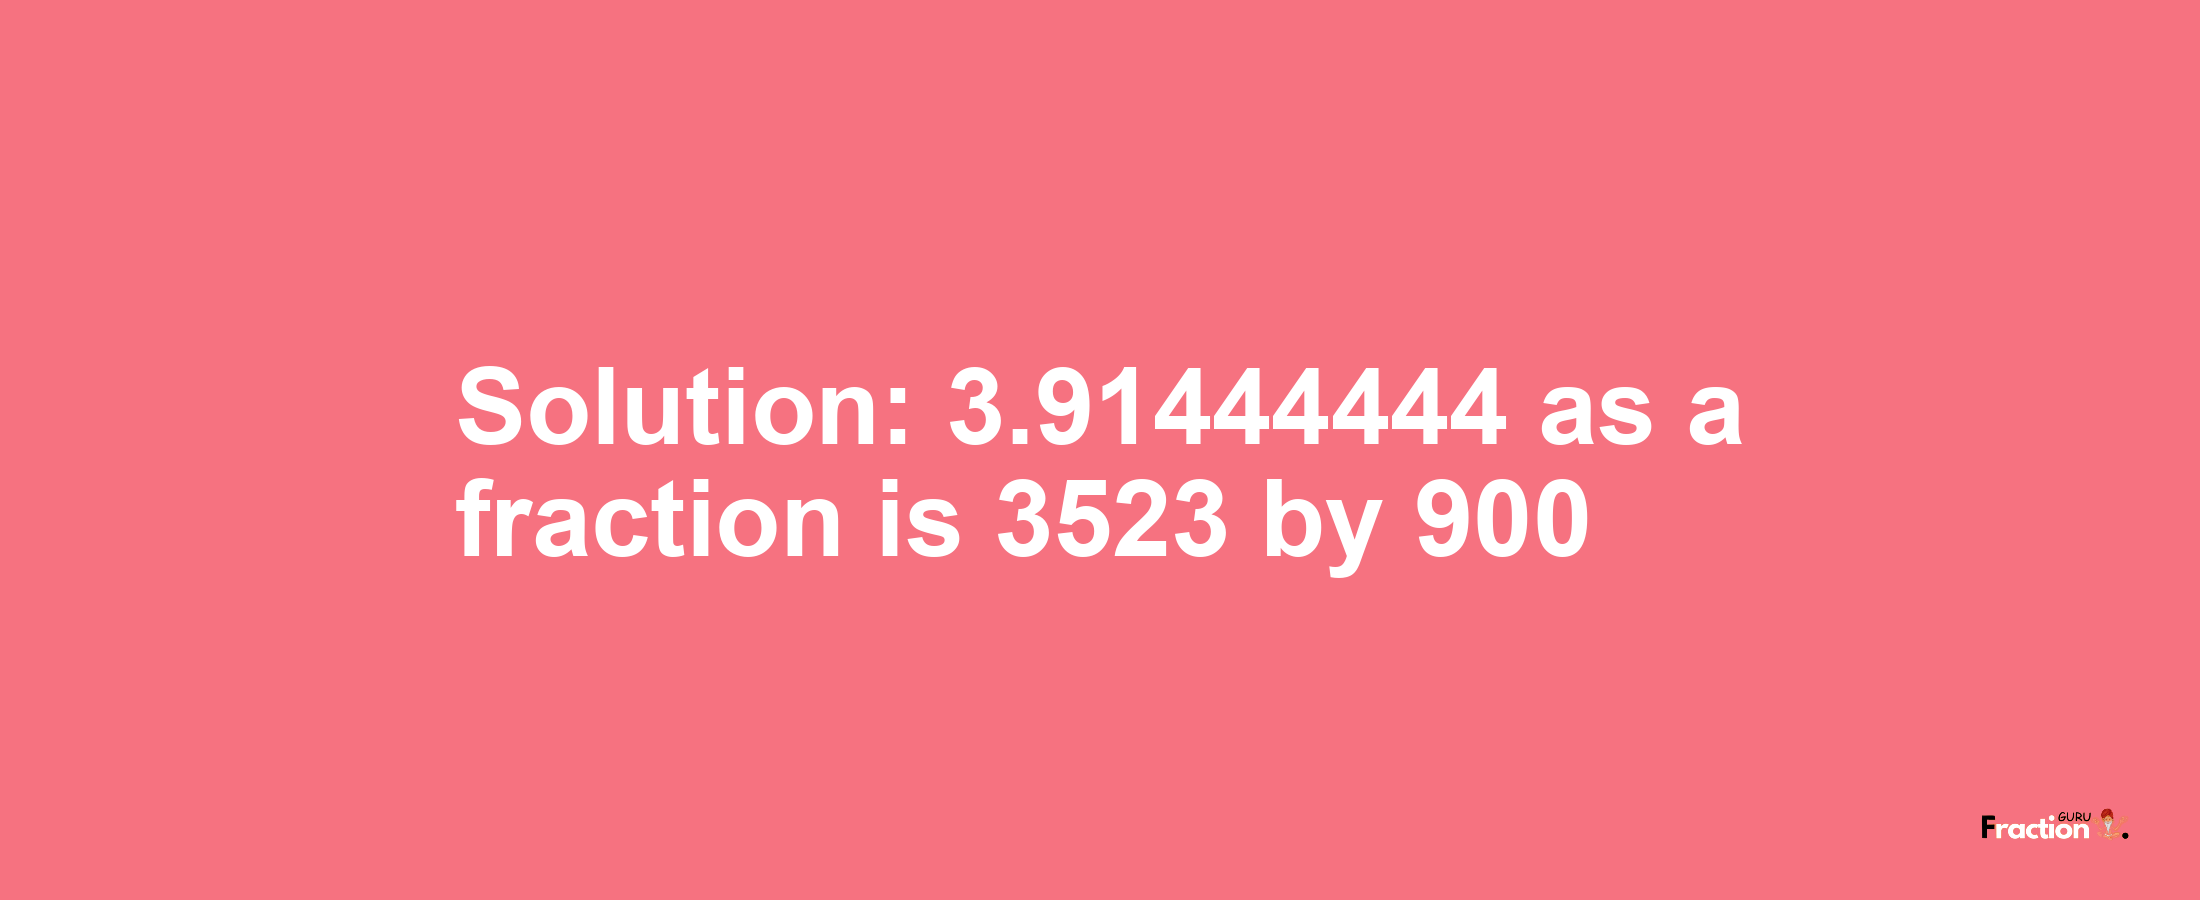 Solution:3.91444444 as a fraction is 3523/900